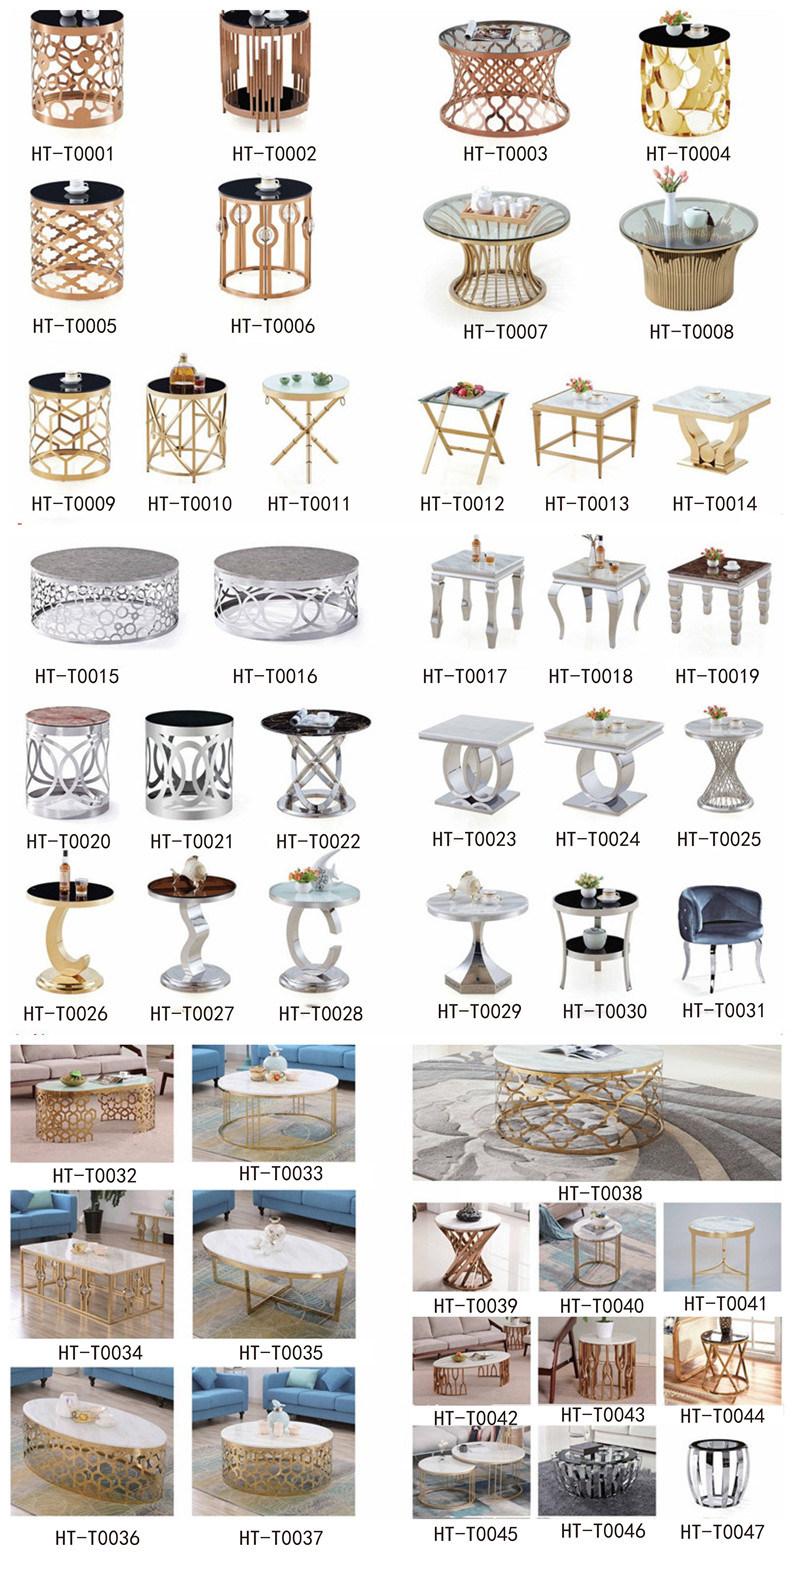 Modern Coffee Table / Metal Living Room Table / Small Table / Console Table / Side Table / Stainless Steel Coffee Table Lamp Table Ball Leg Table